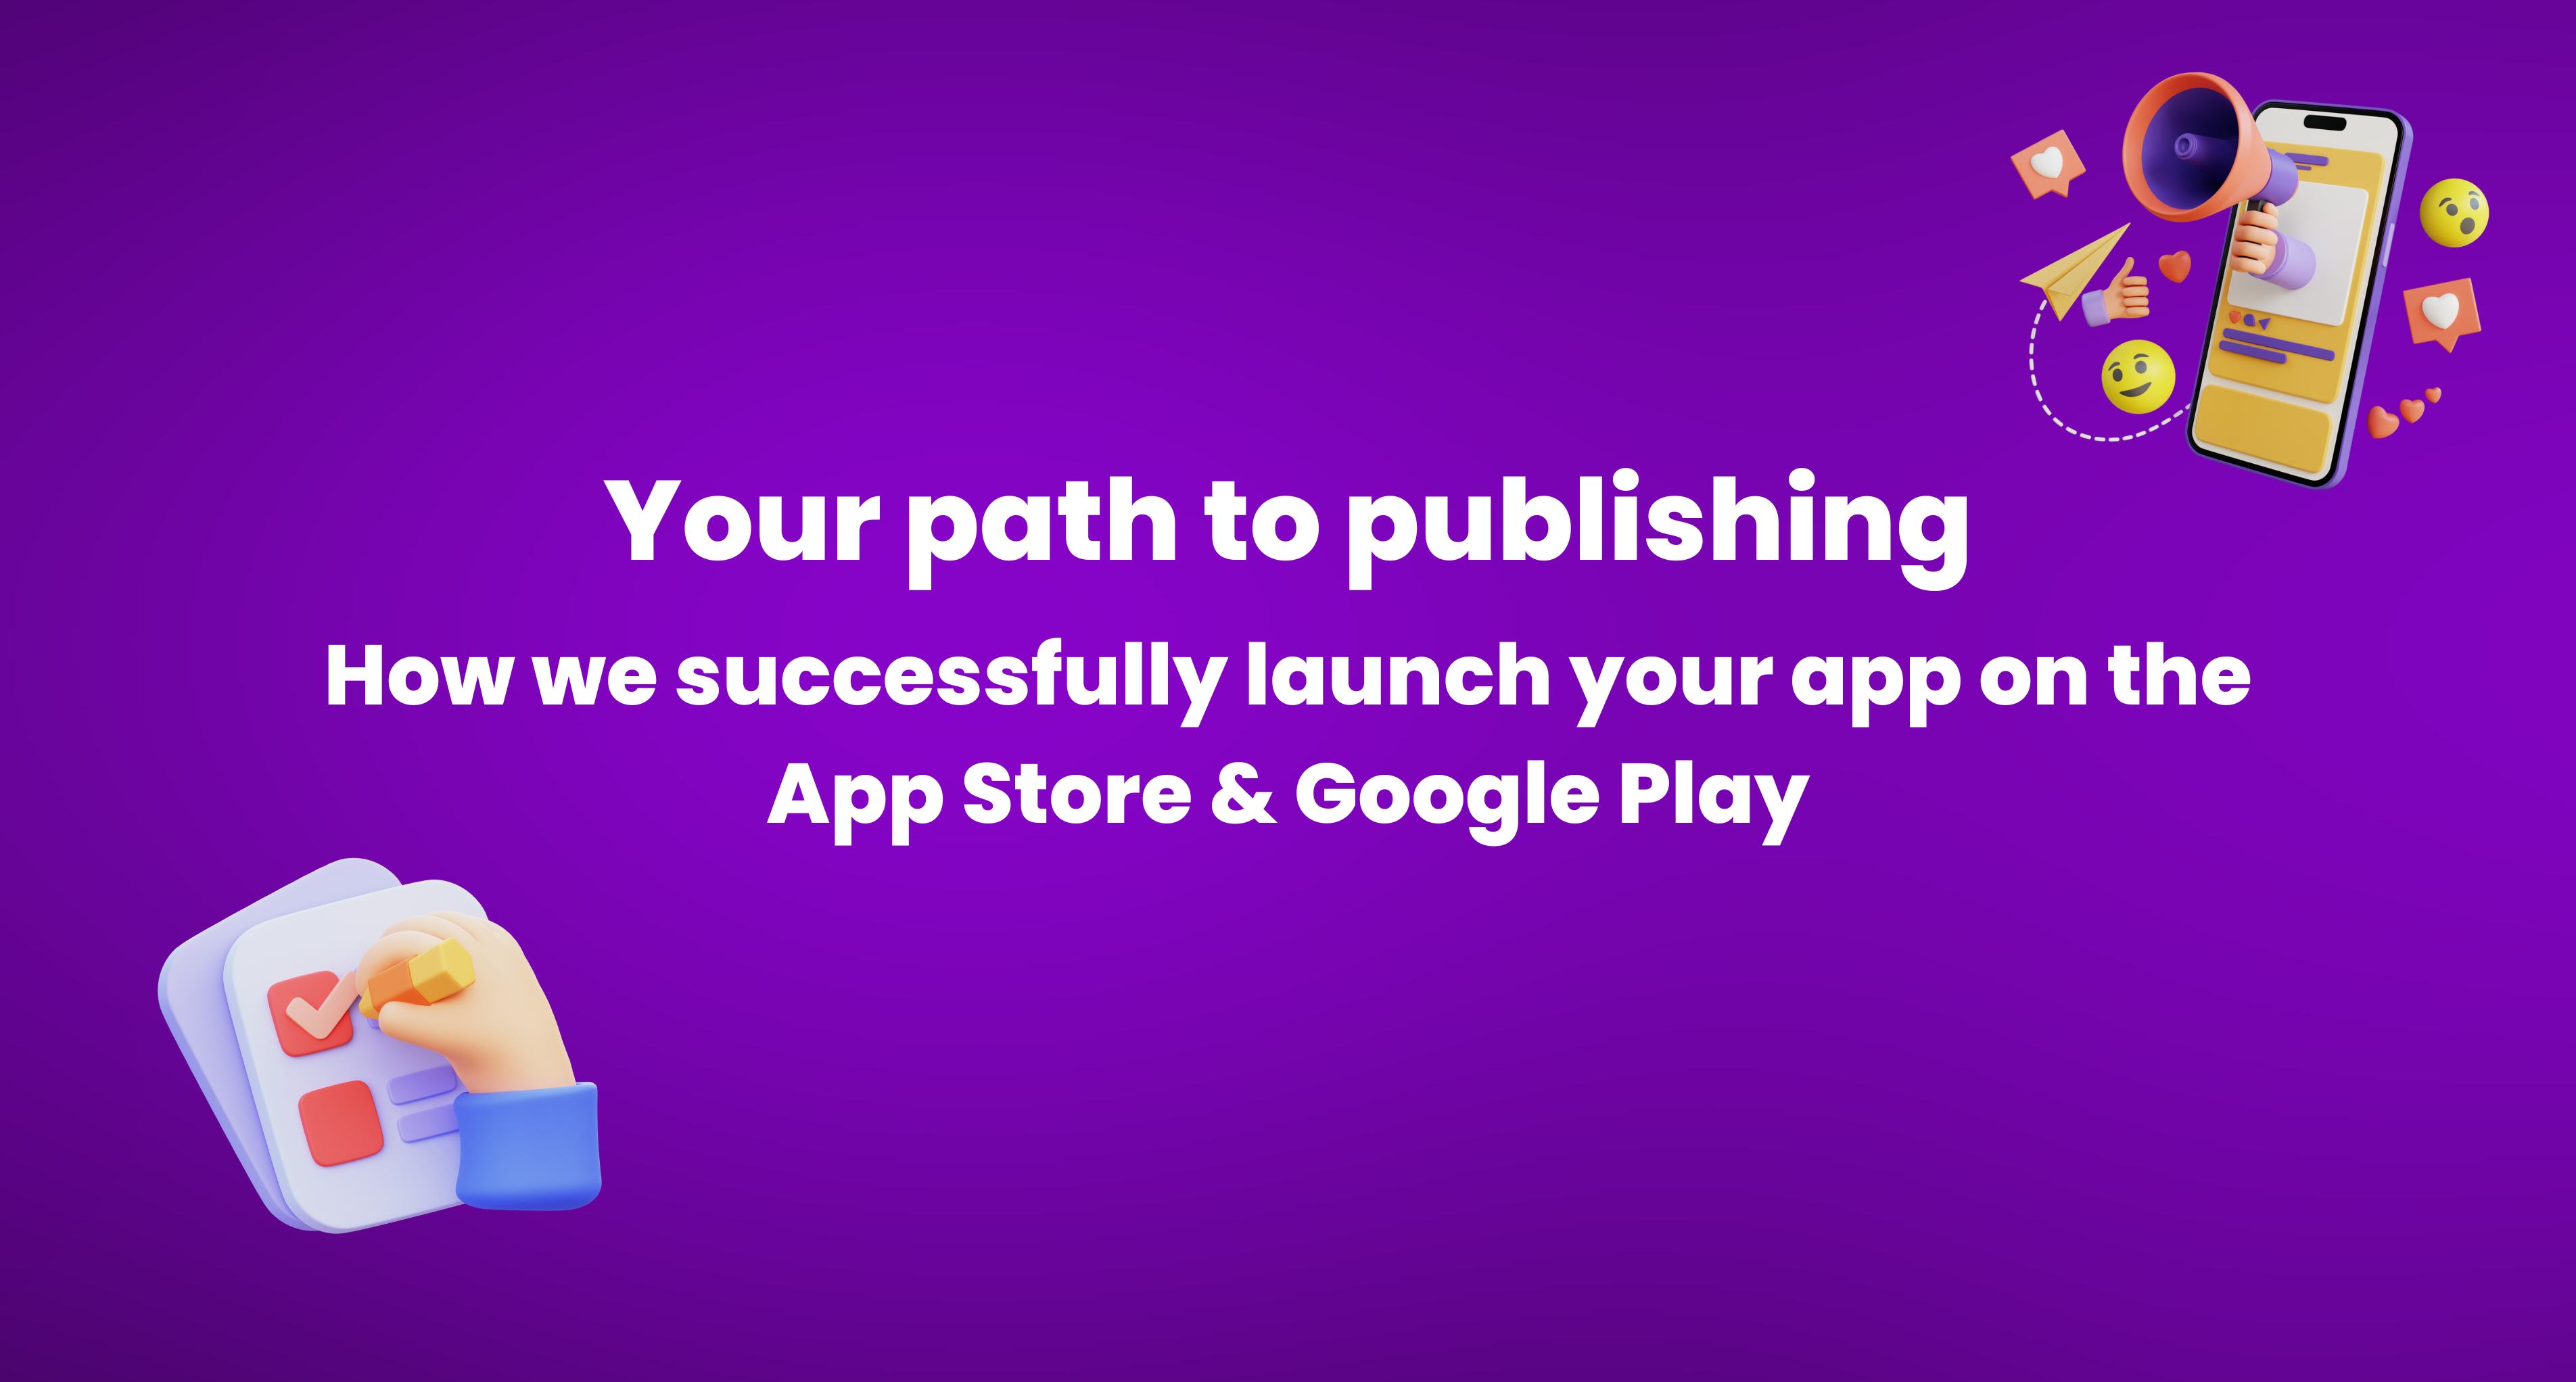 Nightborn - Your path to publishing - How we launch your app